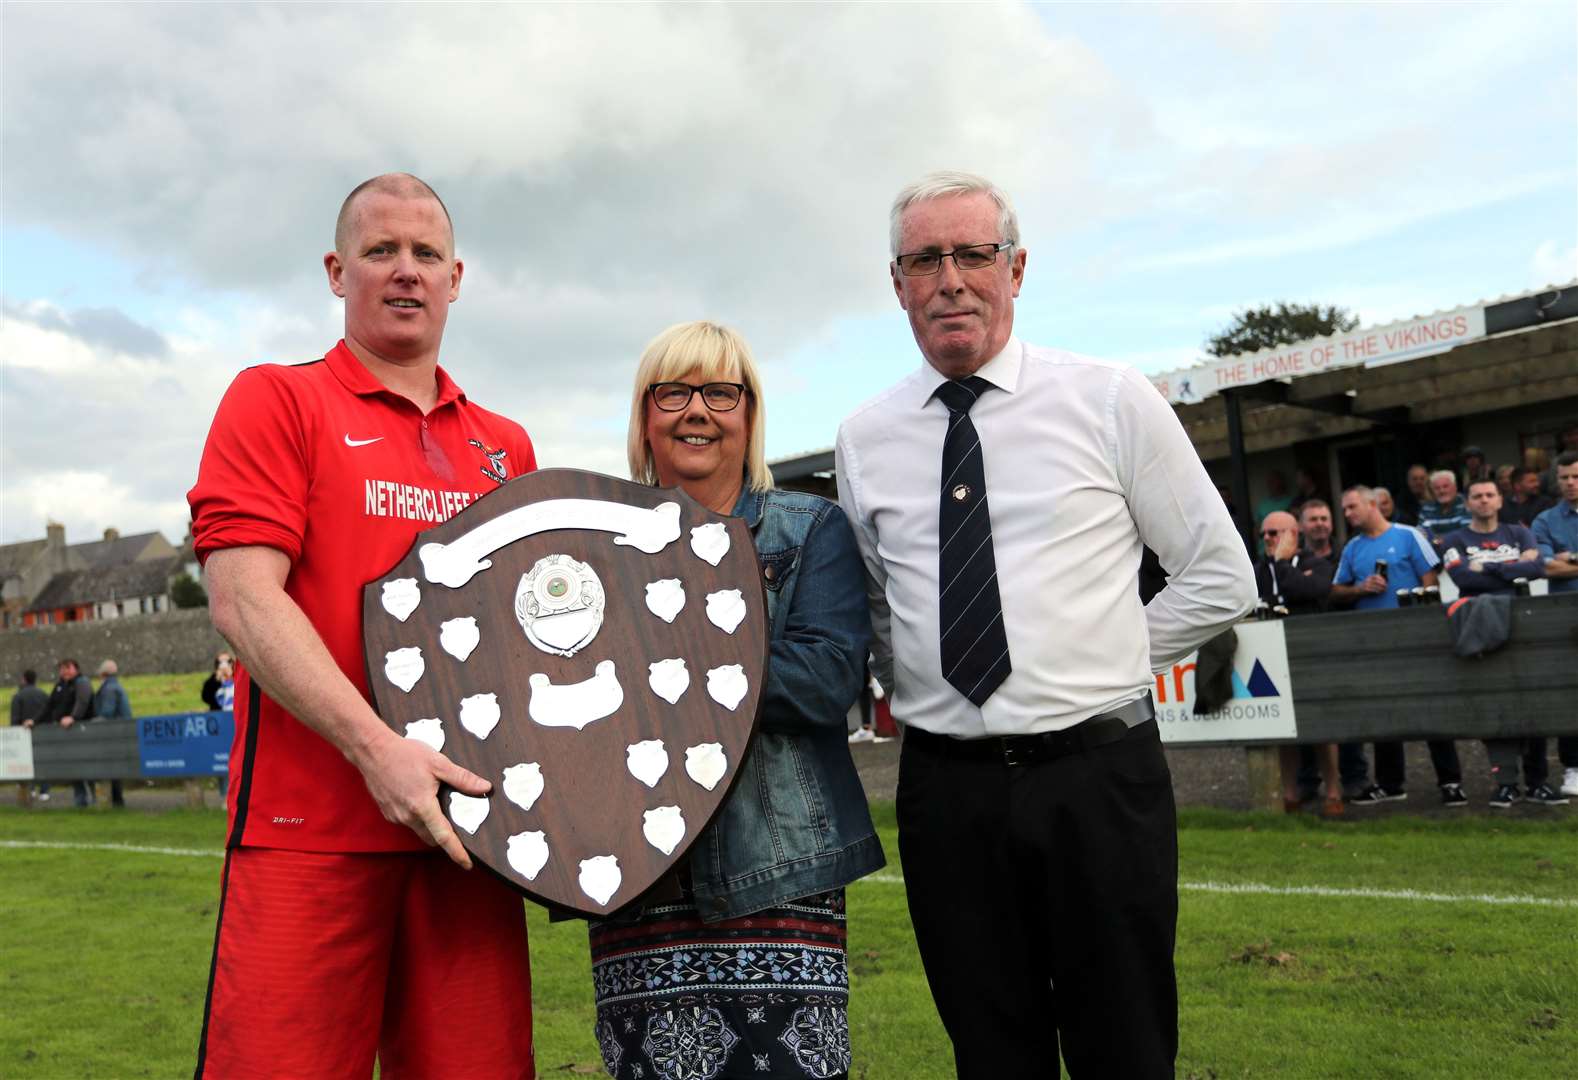 Alan Sinclair of Wick Groats receives the David Allan Shield in 2019 from Linda Moran, watched by Caithness AFA president Murray Coghill. Picture: James Gunn